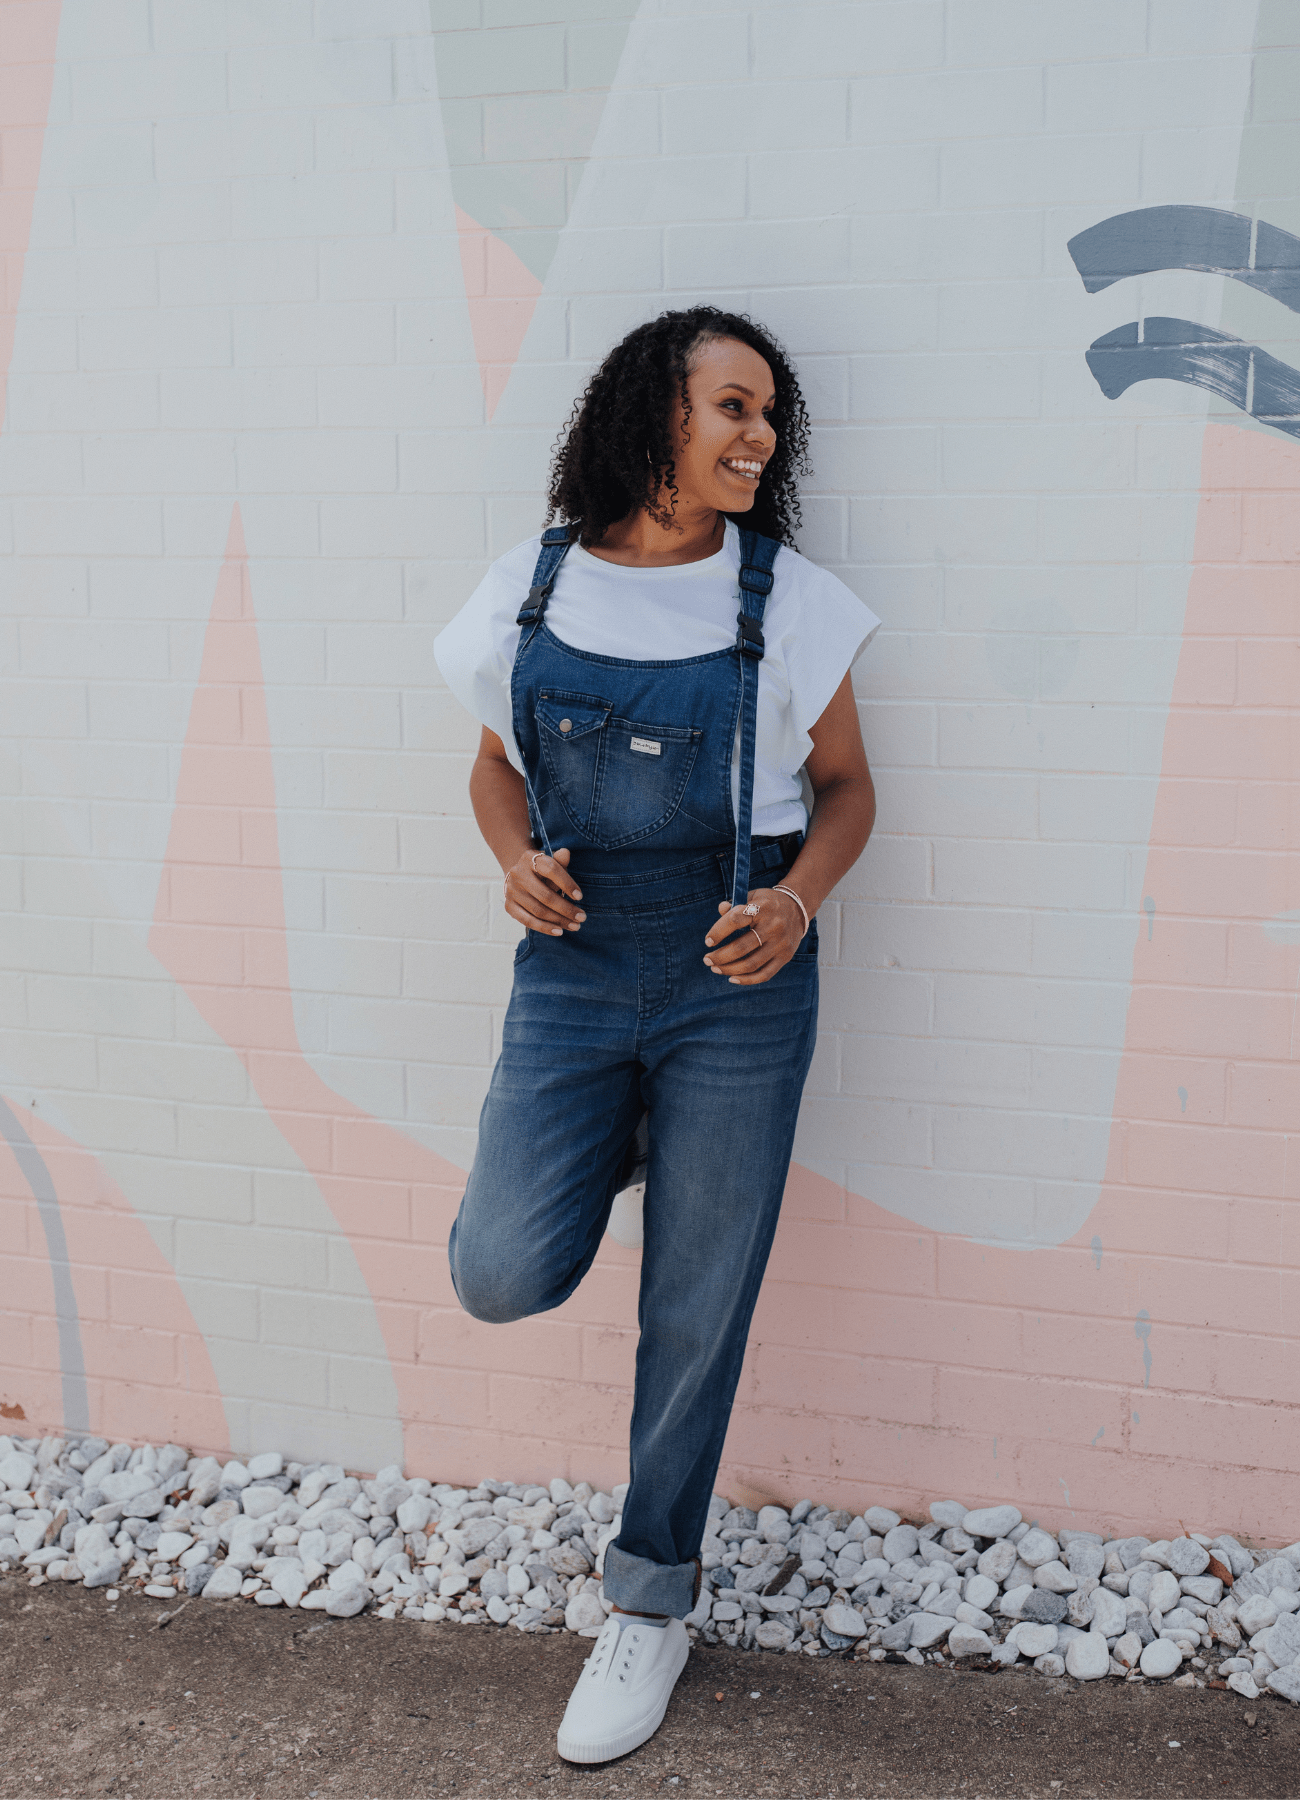 the lovechild - the mumsie baby wearing overalls maternity baby carrier pregnancy